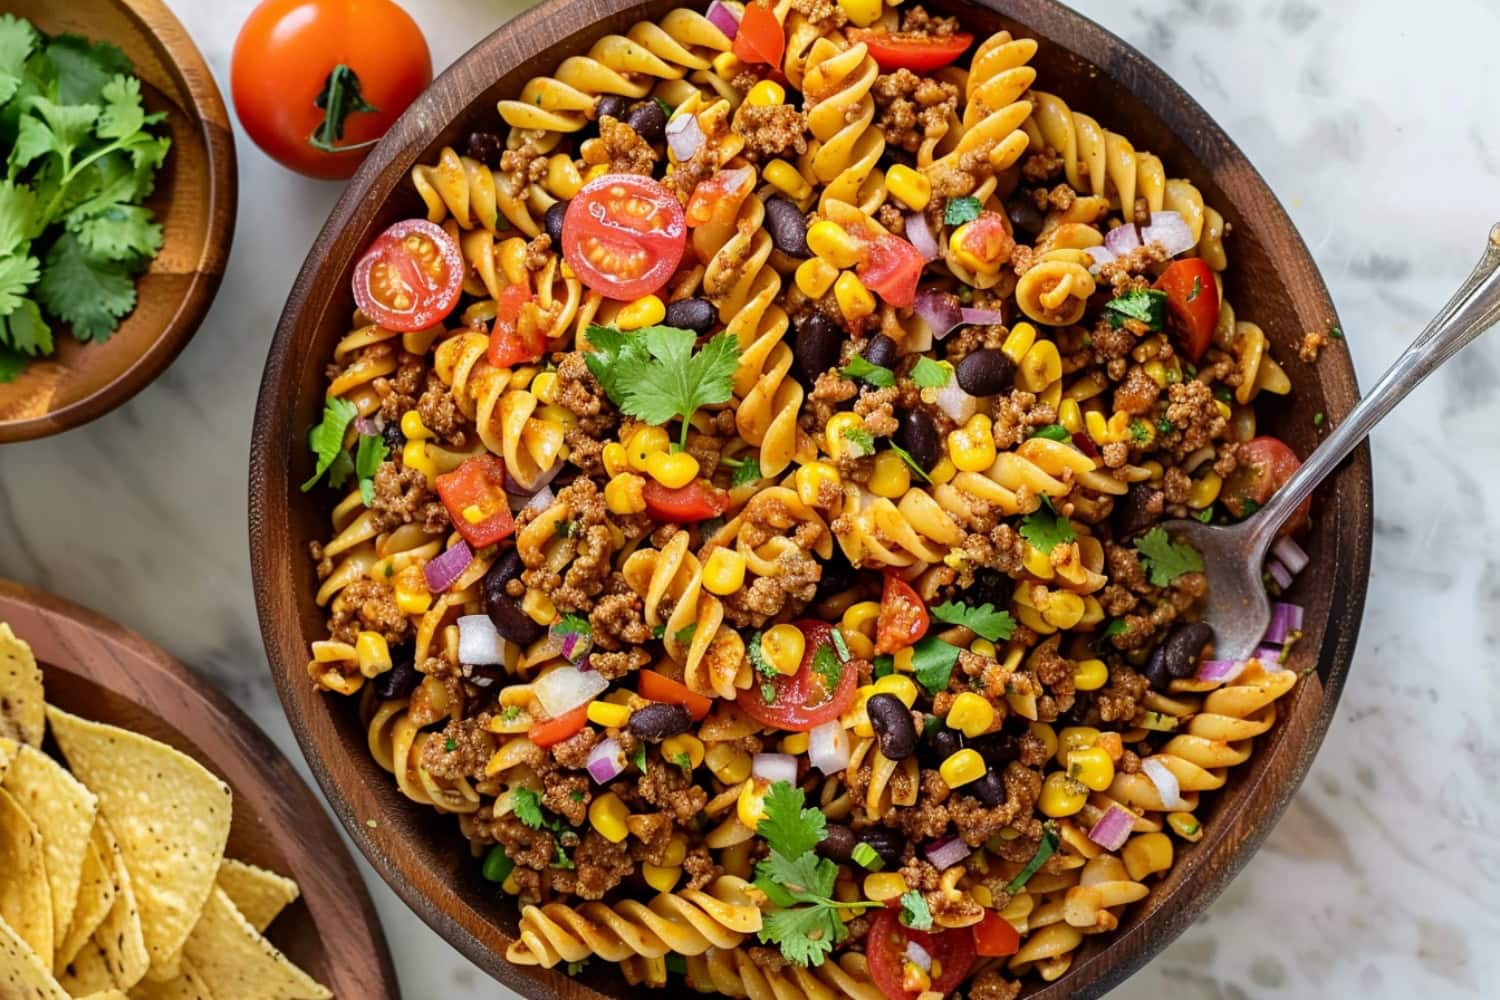 Homemade taco pasta with fresh vegetables, a bowl of taco on the side.